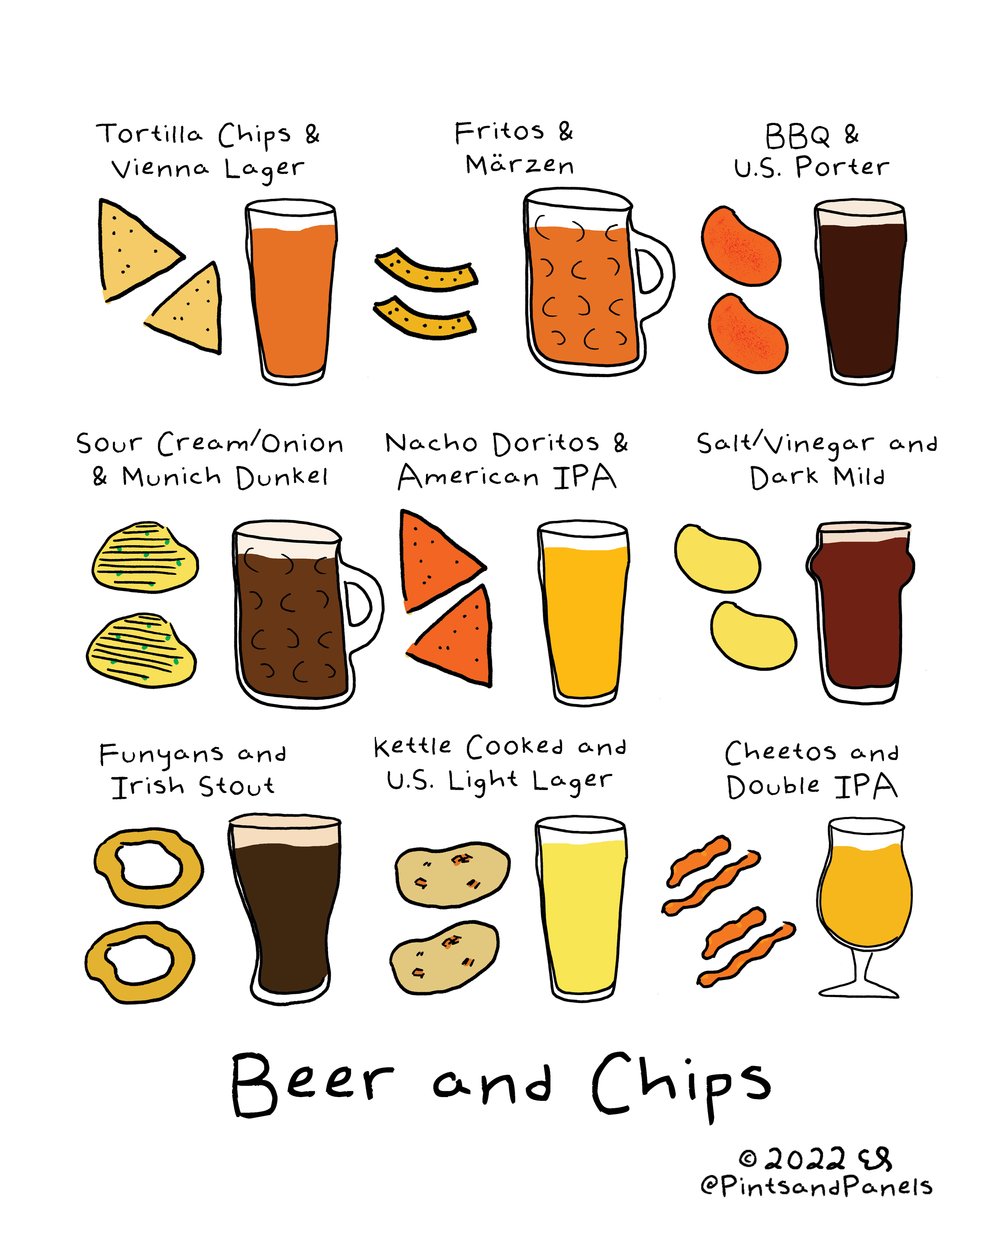 Boelter's Guide to Pairing Beer With Glassware